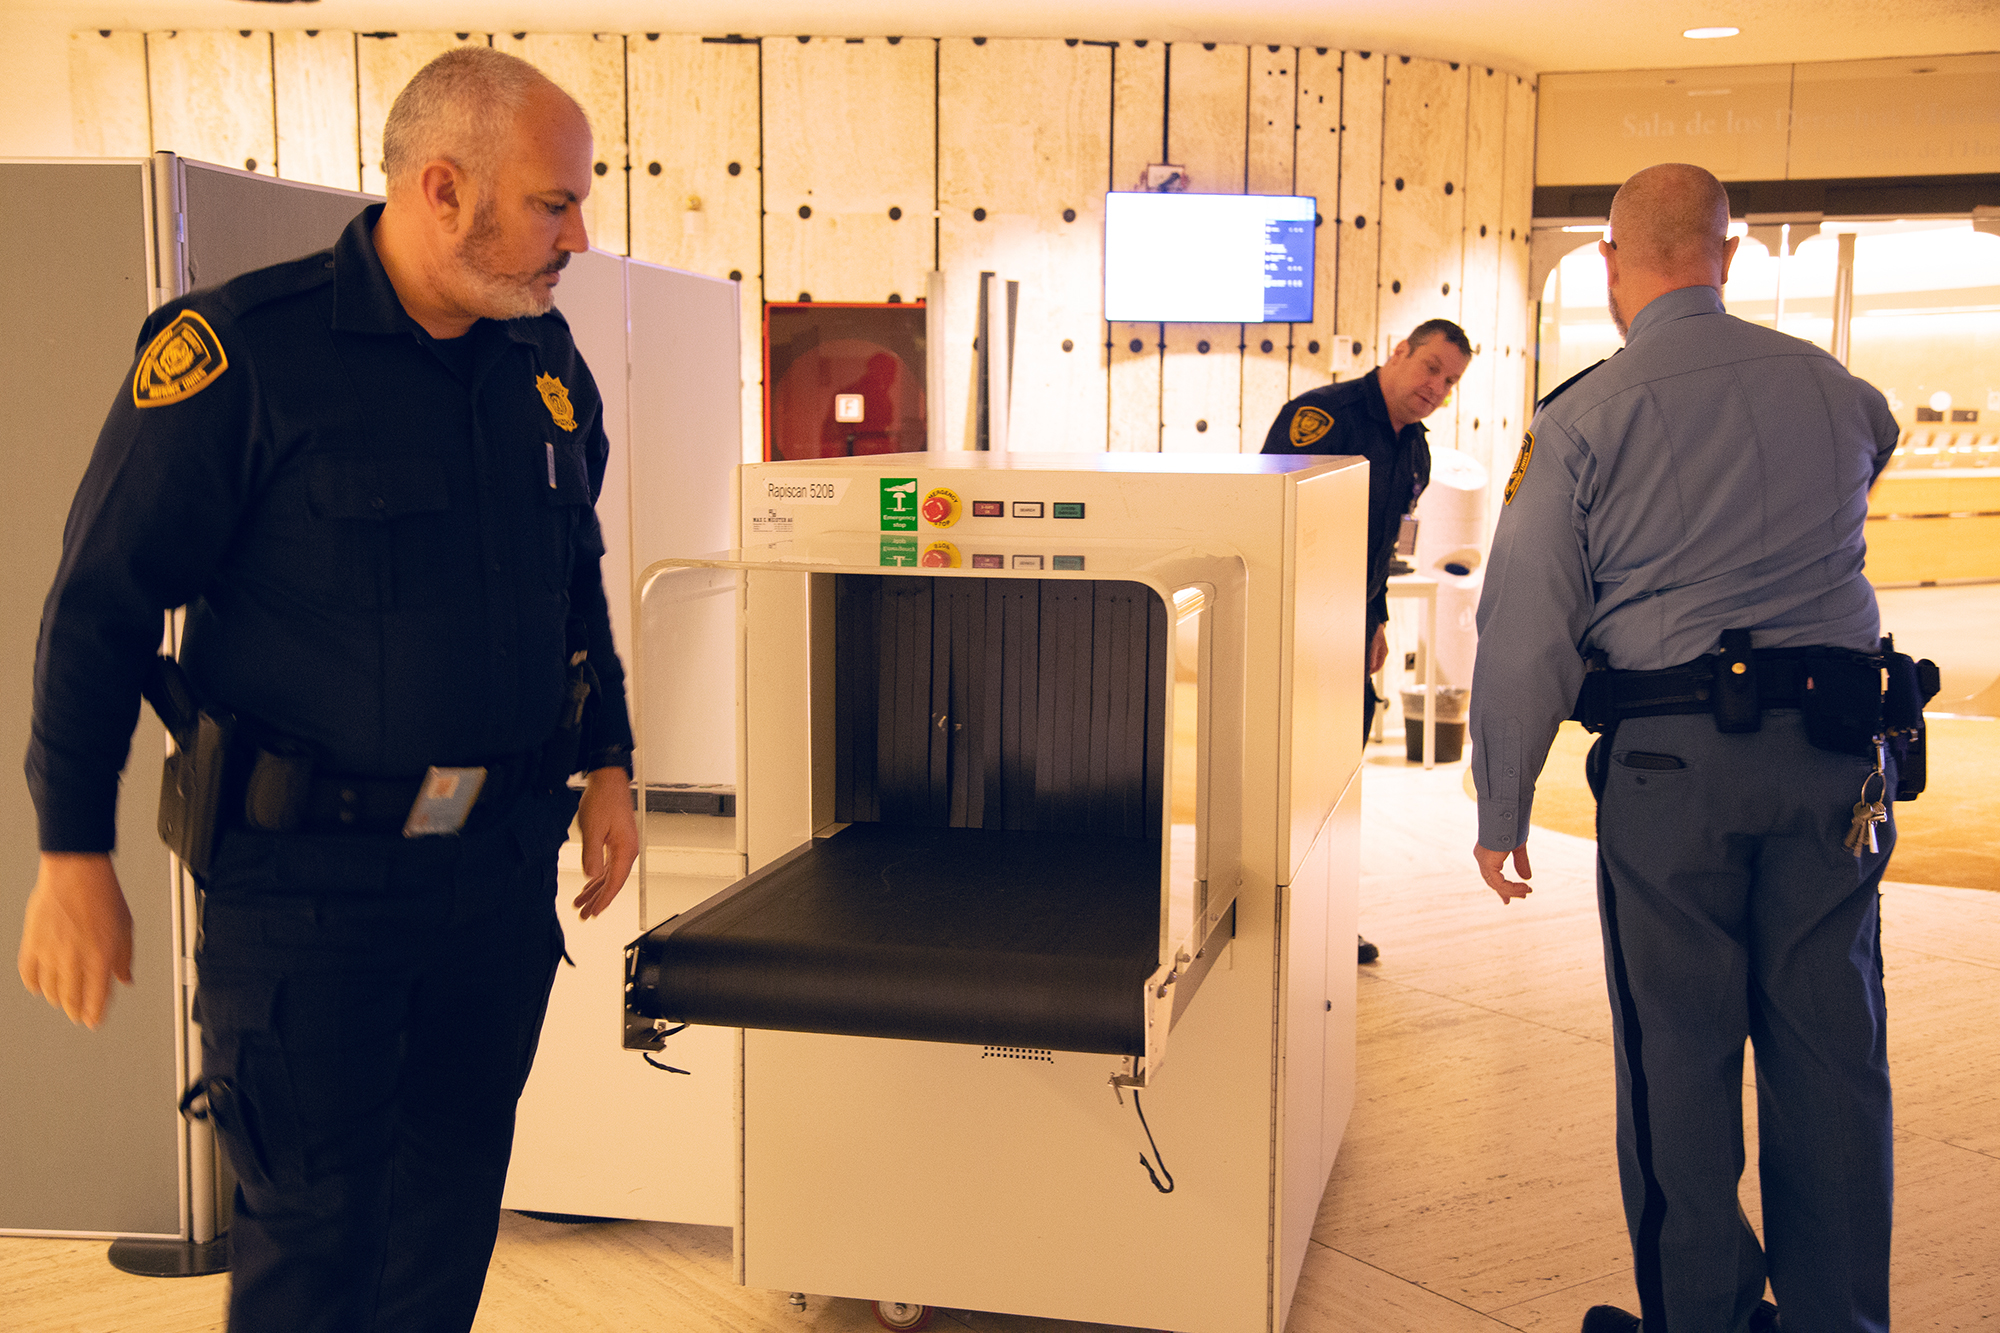 Three Security and Safety Service officers surround an x-ray machine. In the background there is an entrance to a conference room and a television screen mounted on a wall.